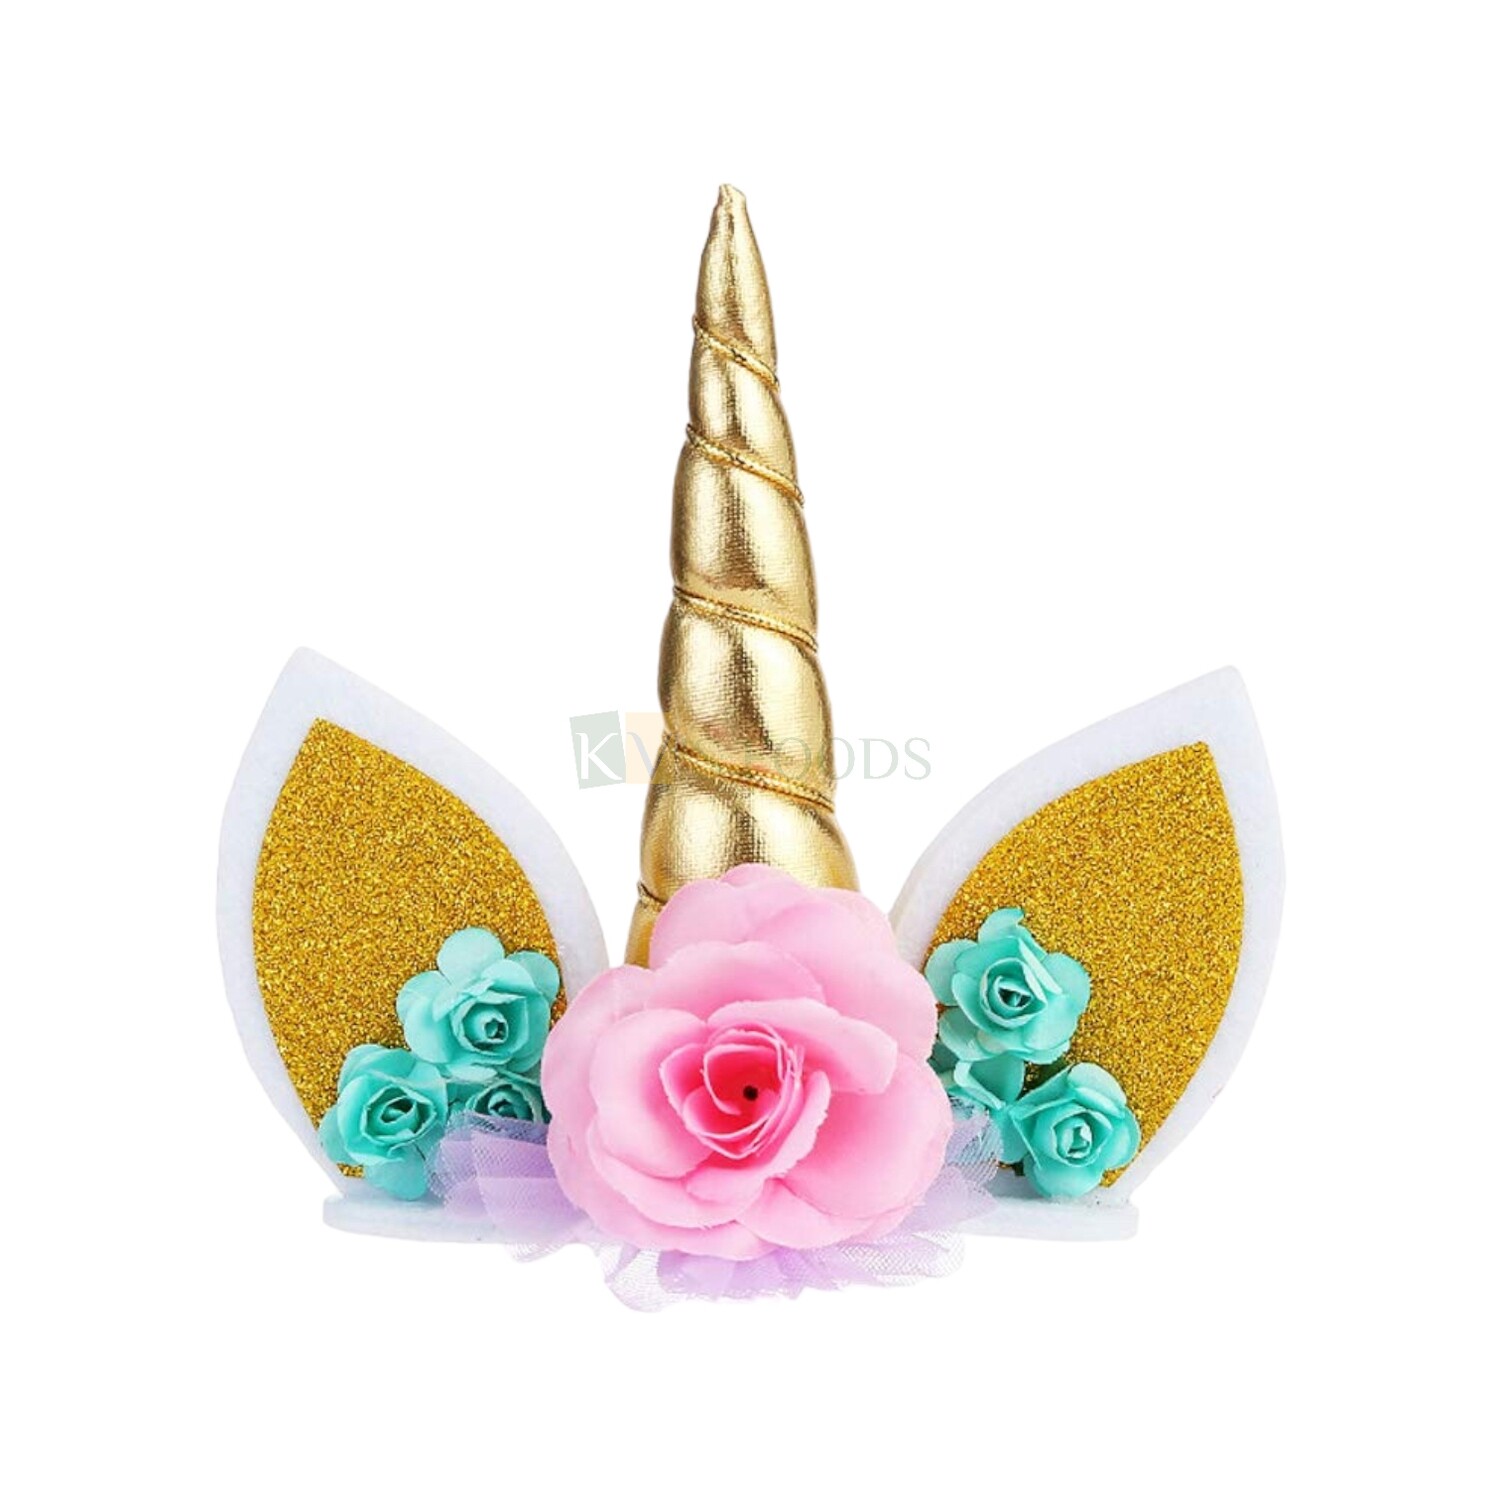 Gold Unicorn Theme Horn Ears and Flowers Set Cake Topper Insert, Reusable Cake Topper For Birthday, Girls, Friends Bday, Decorations Items, Cake Accessories, Tags, Cake Toothpick Topper